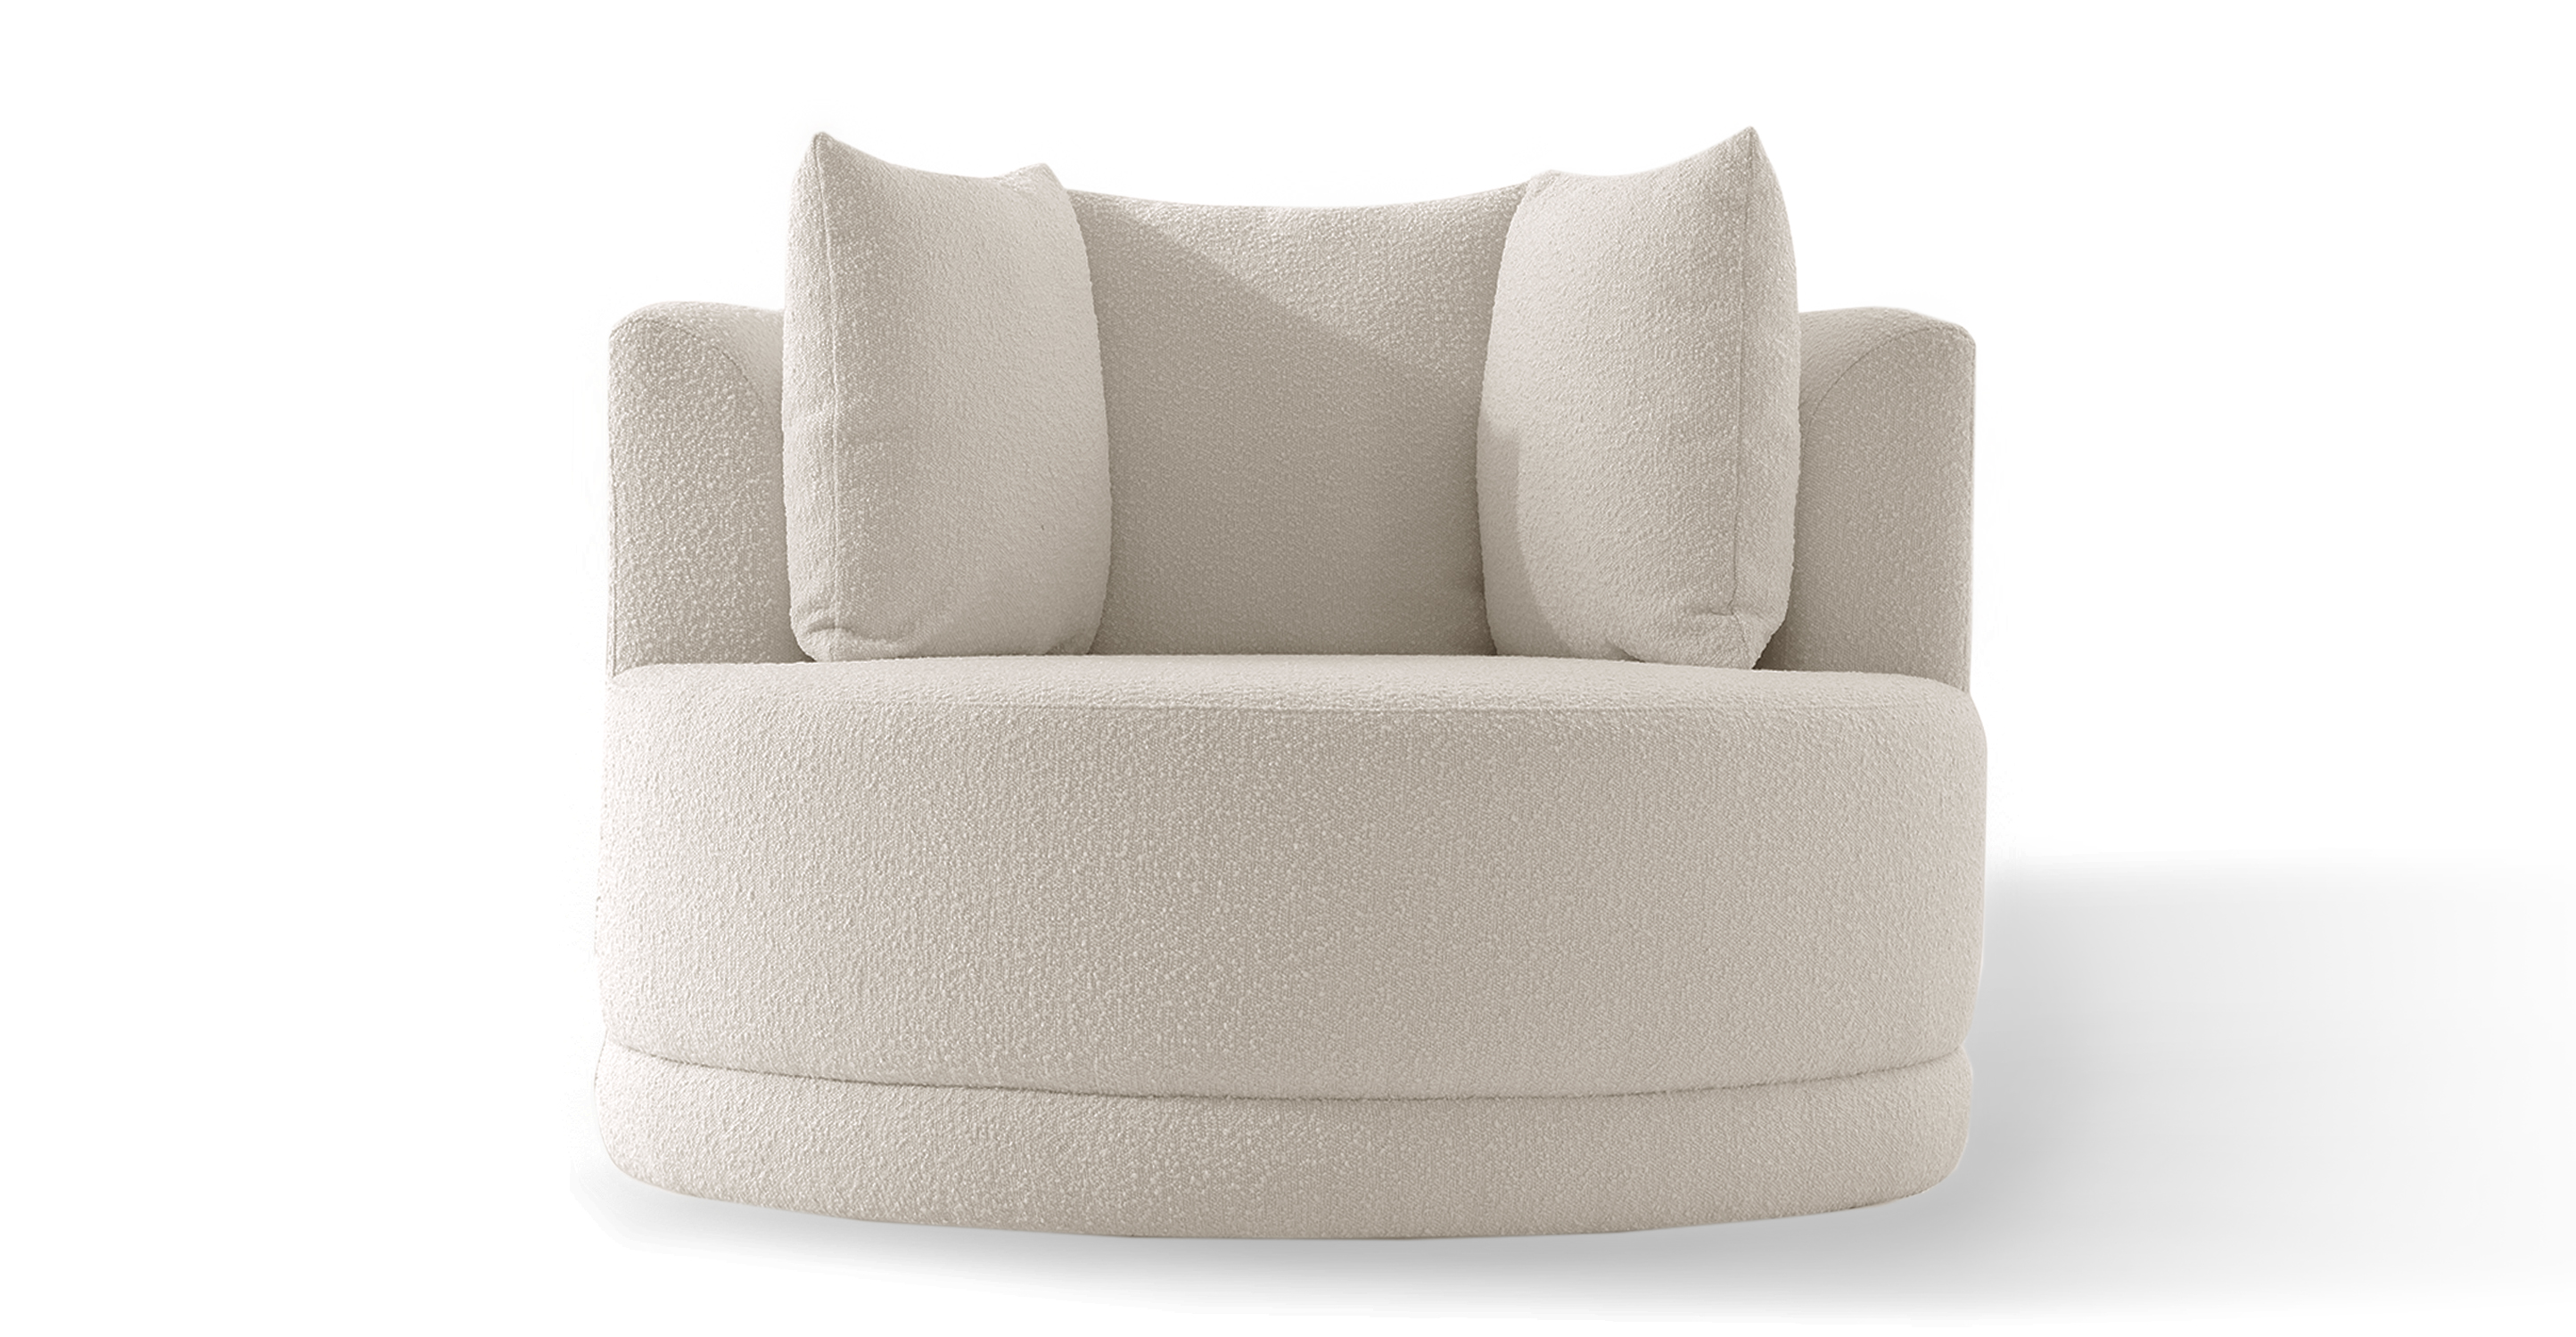 Domus Barrel Chair in Blanc has a large attached cushion base that is rounded in the front. The arm style is straight on the exterior of the chair, with a curved taper on the inside. The chair is floor based and 100% upholstered. The chair has three back cushions. The style is modern and minimalist.